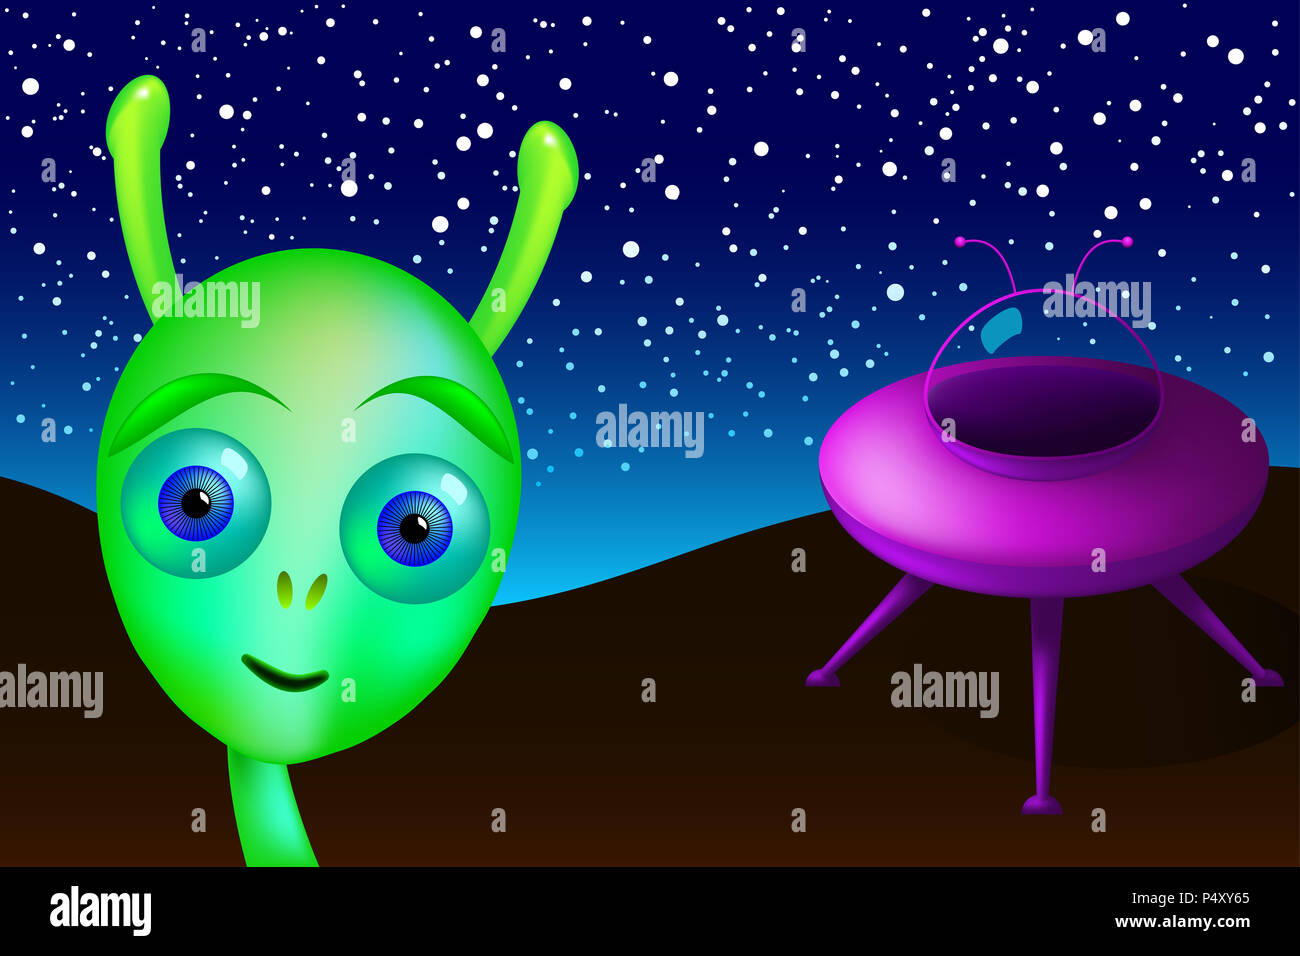 Little green alien with purple saucer visits Earth. Green man from Mars landed in the desert, undiscovered, under night sky and bright stars. UFO. Stock Photo